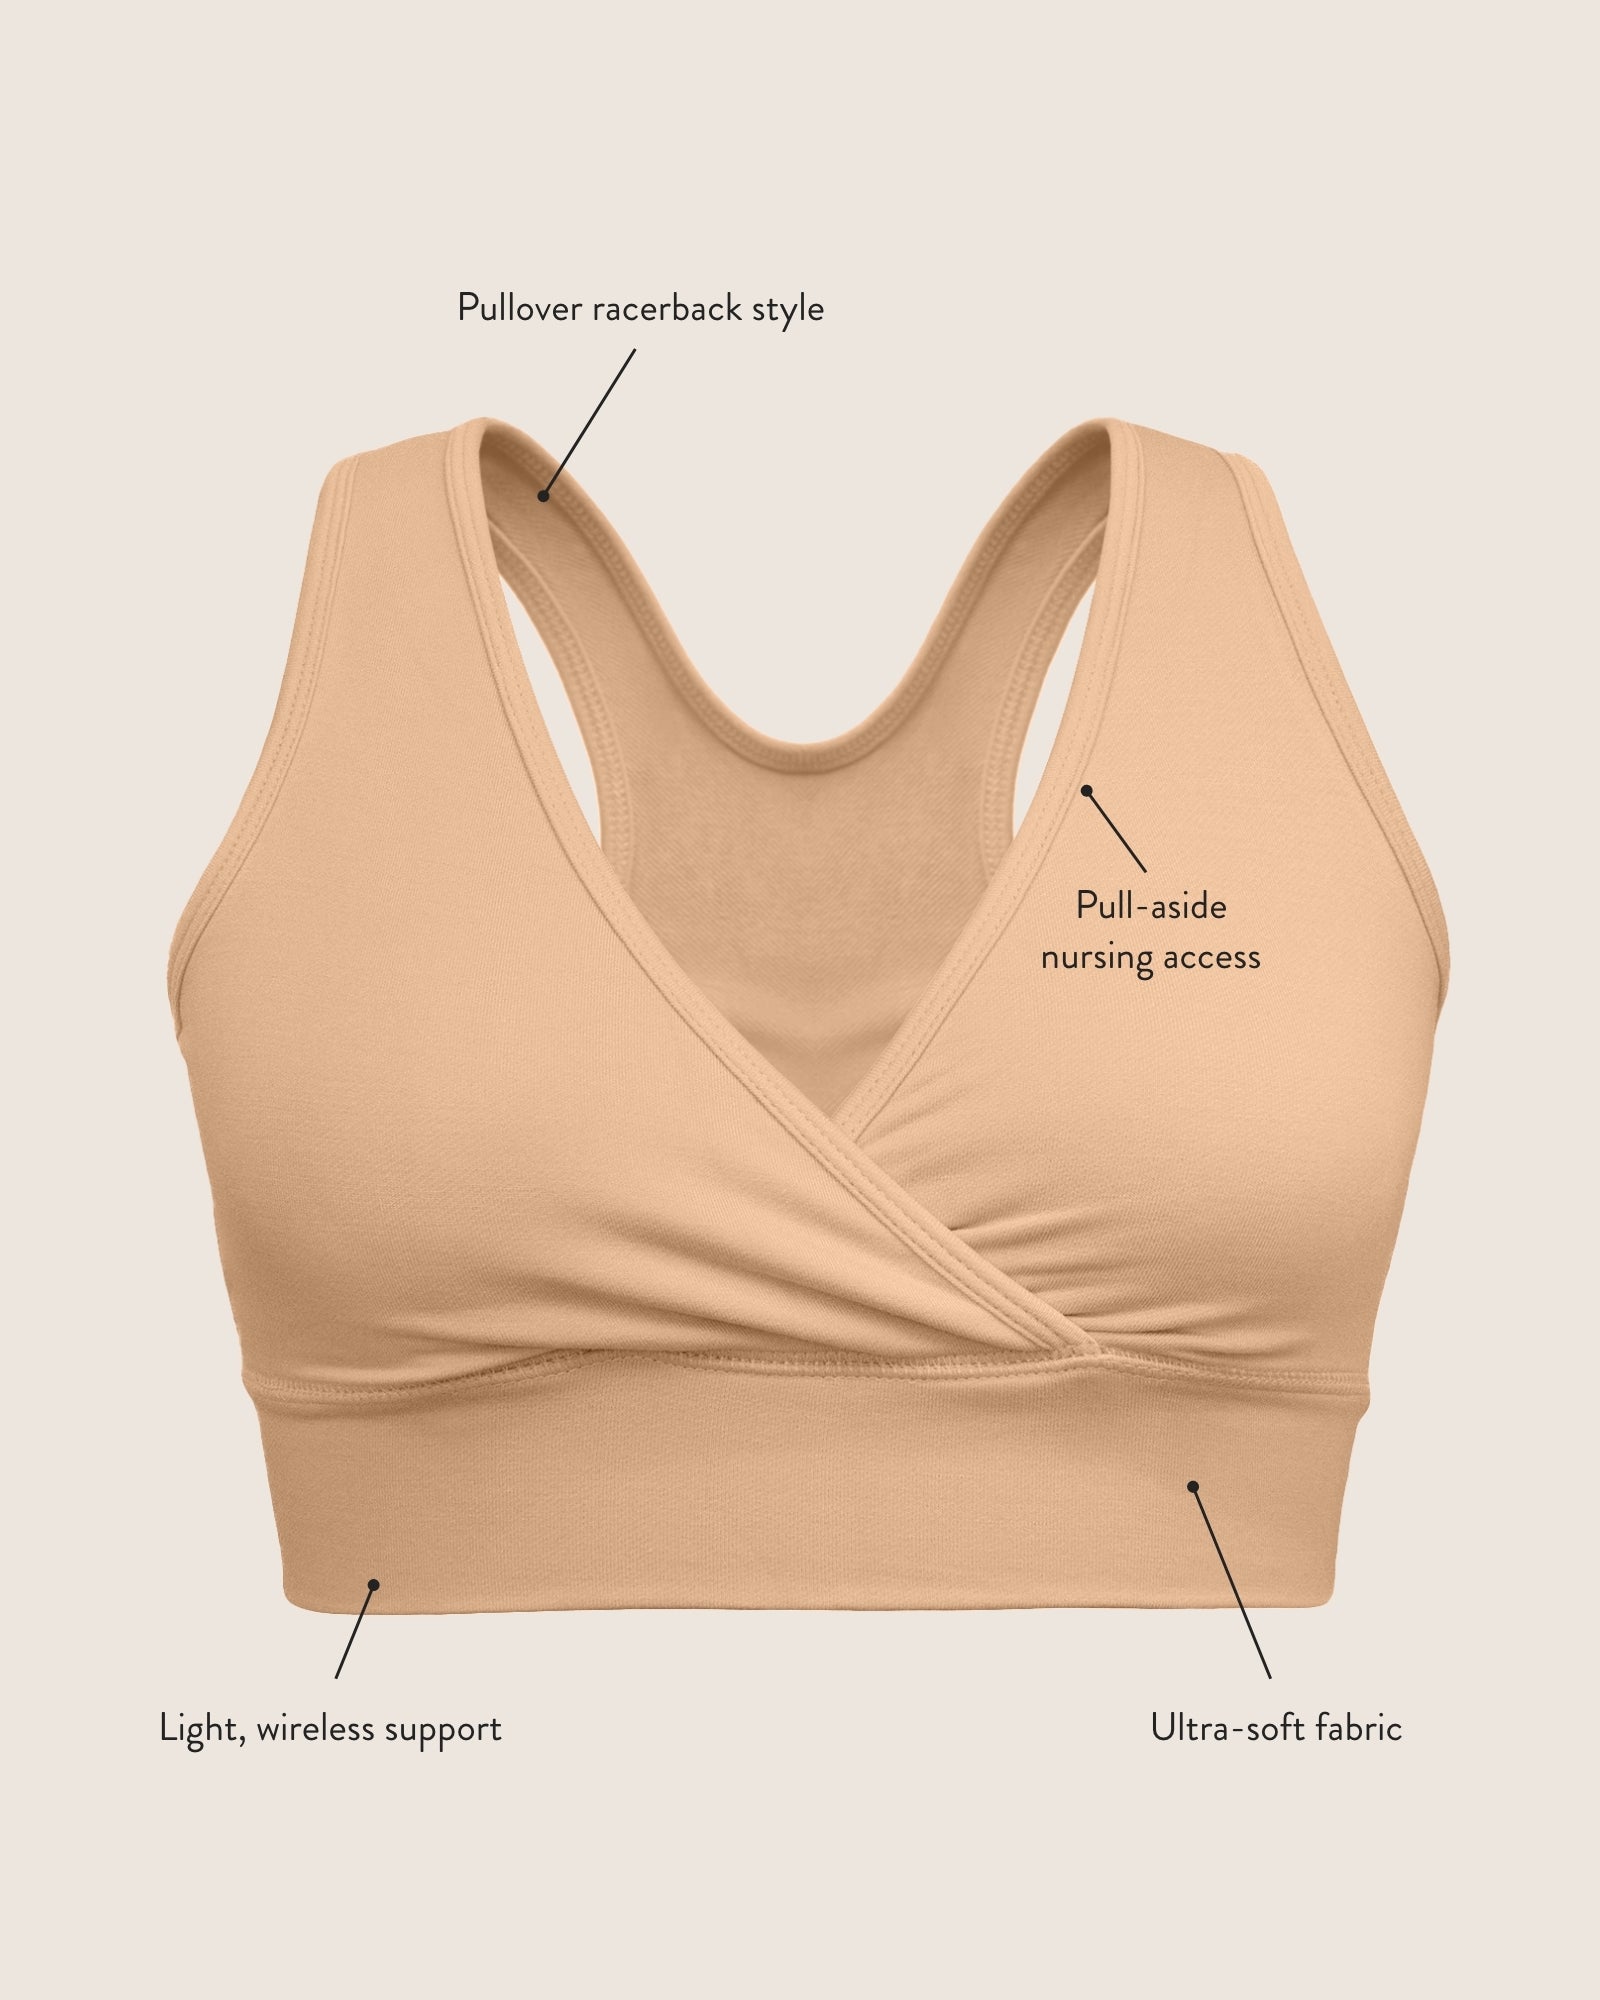 French Terry Racerback Nursing & Sleep Bra image with feature callouts